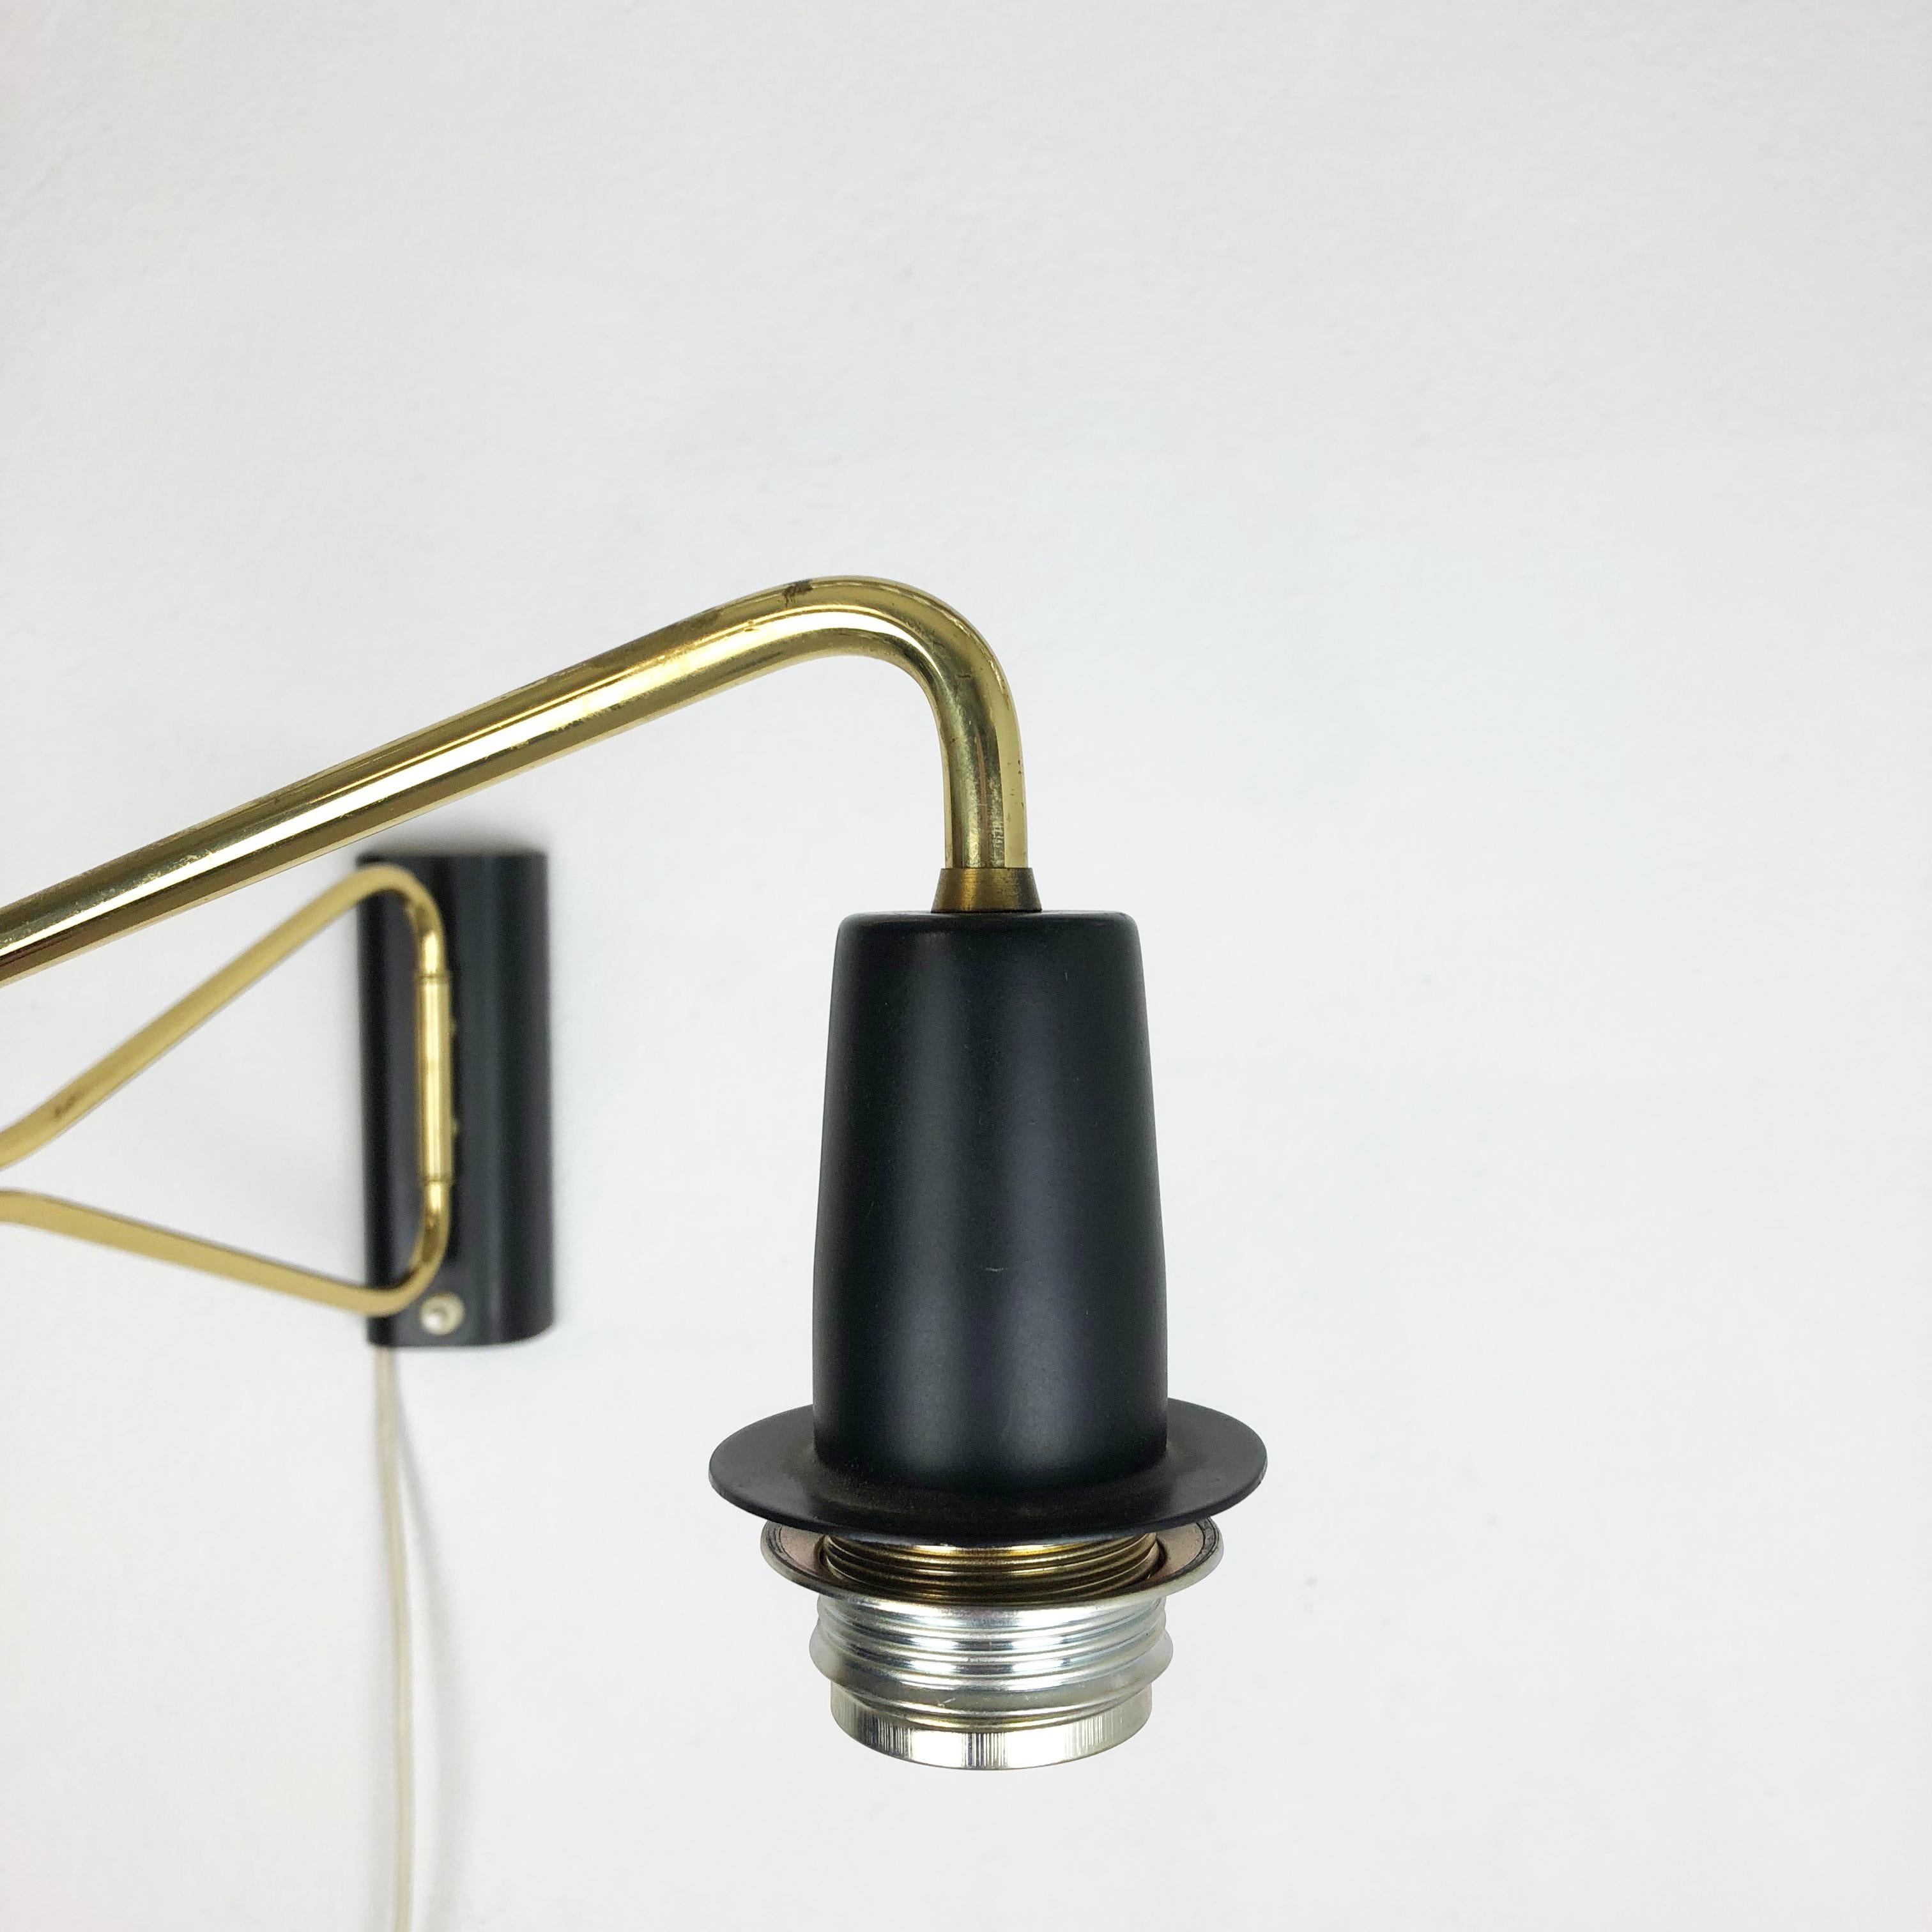 Original Modernist 1950s Brass Metal Swing Wall Light Made by Cosack, Germany 2